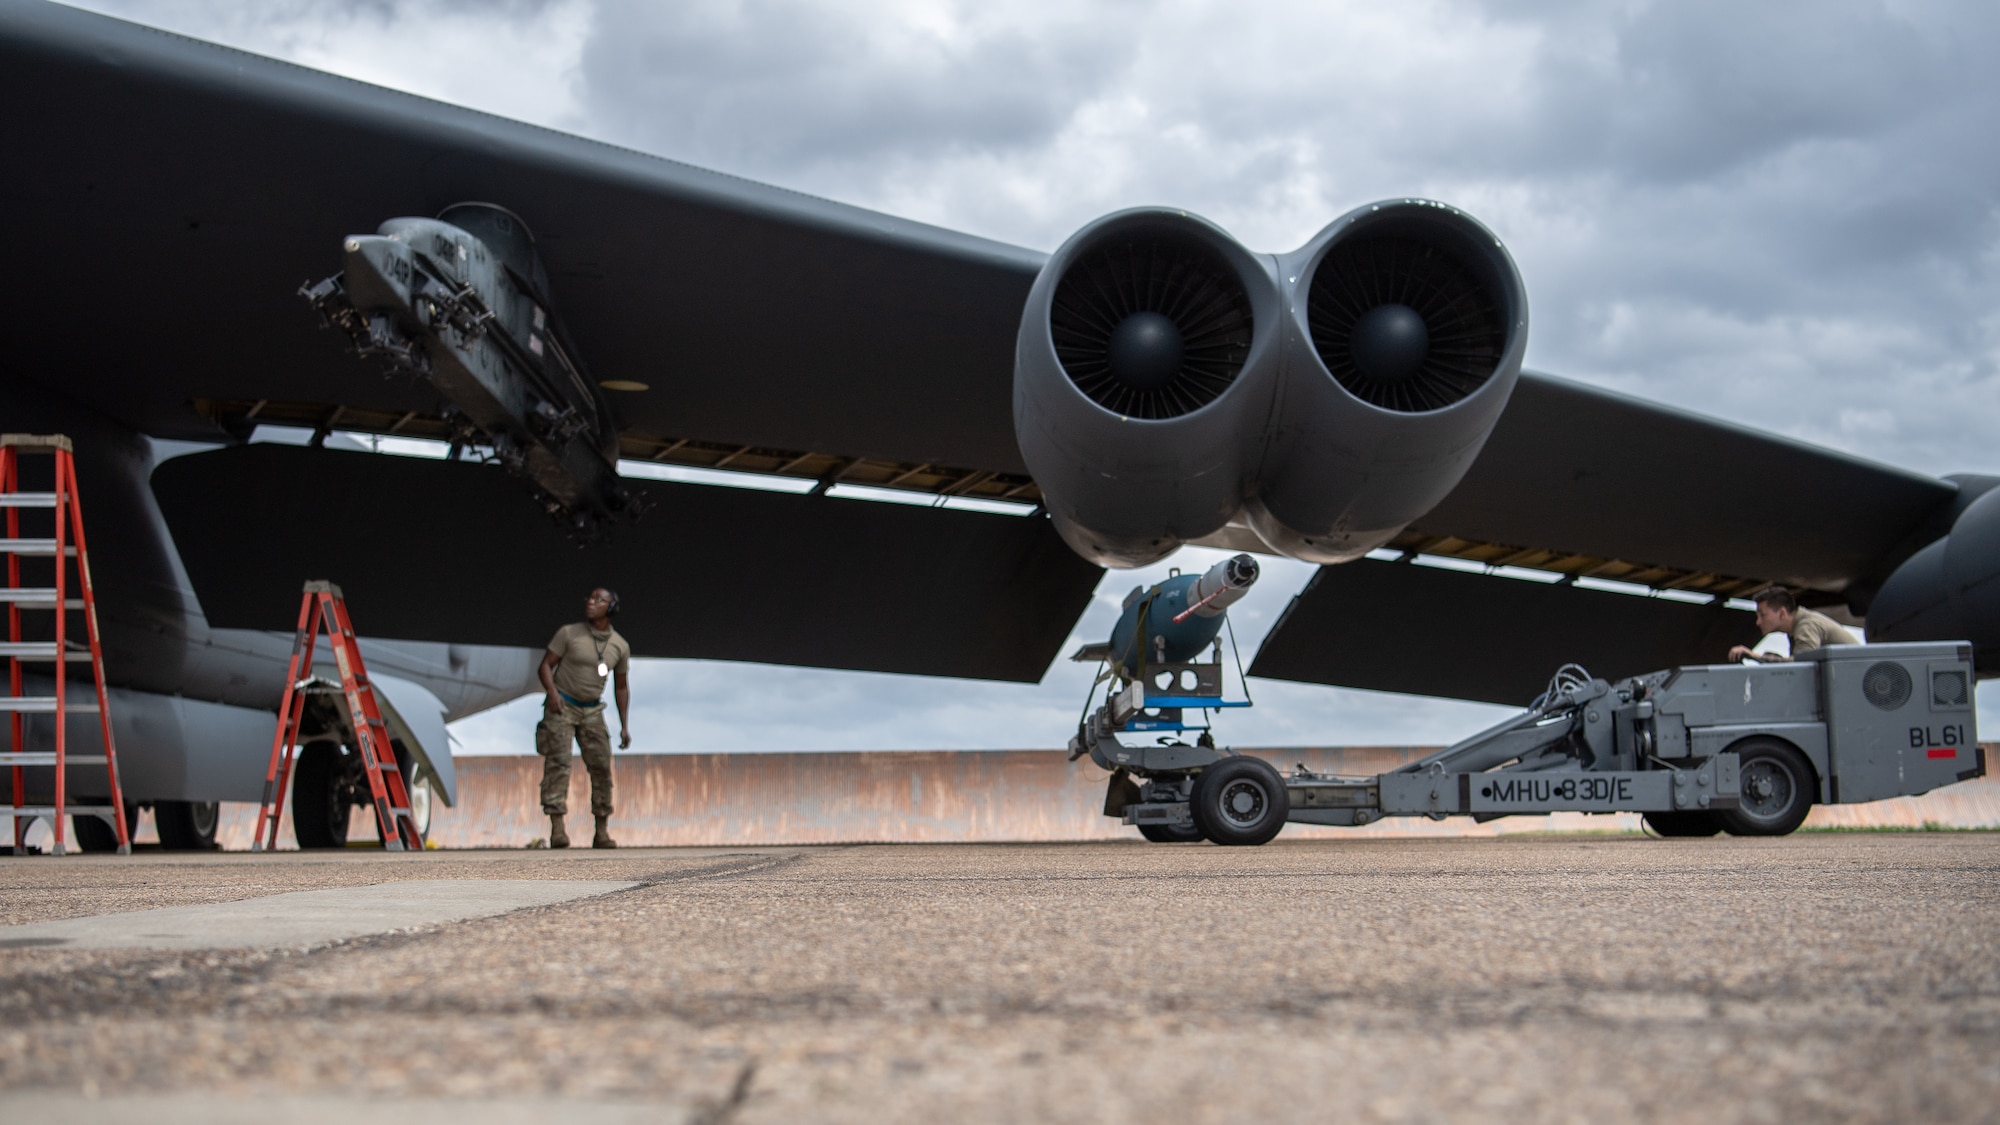 Airman 1st Class Jake W. Wagner, 2nd Aircraft Maintenance Squadron weapons load crew member, transports a GBU-10 muntion to be loaded onto a B-52H Stratofortress during Combat Hammer at Barksdale Air Force Base, La., March10 , 2021. Airmen from the 2nd Bomb Wing loaded and employed nearly 50 types of various munitions and flew a total of eight sorties in support of exercise Combat Hammer. (U.S. Air Force photo by Airman 1st Class Jacob B. Wrightsman)